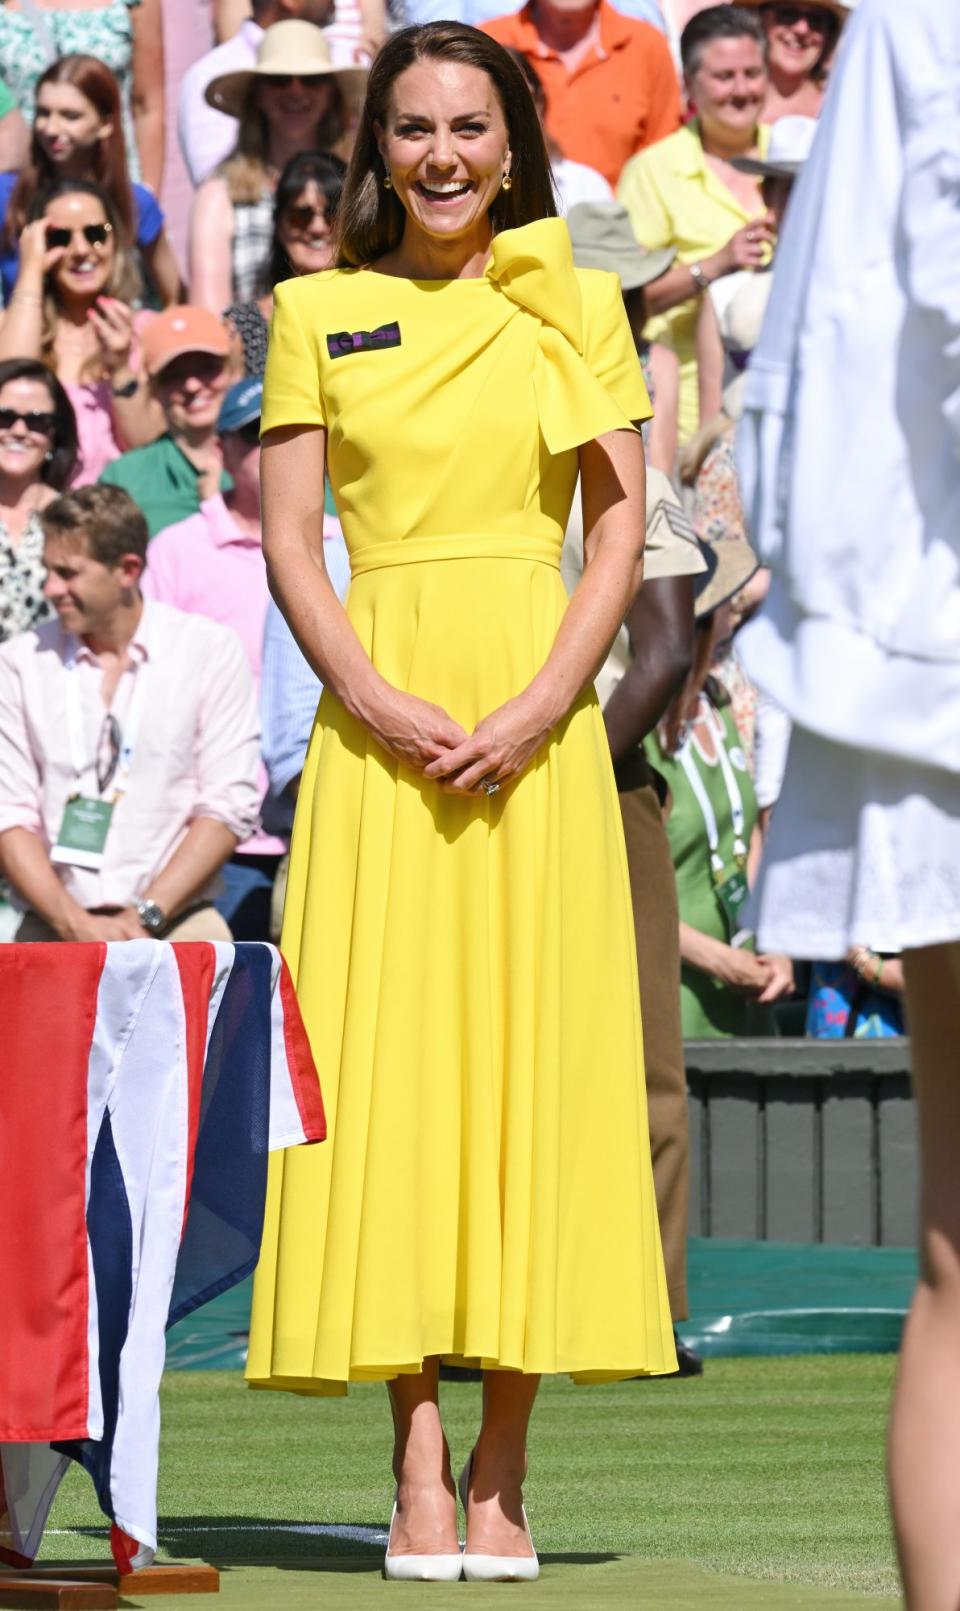 Kate Middleton's Chic Summer Style: Sun Hats, Shades and Dresses!